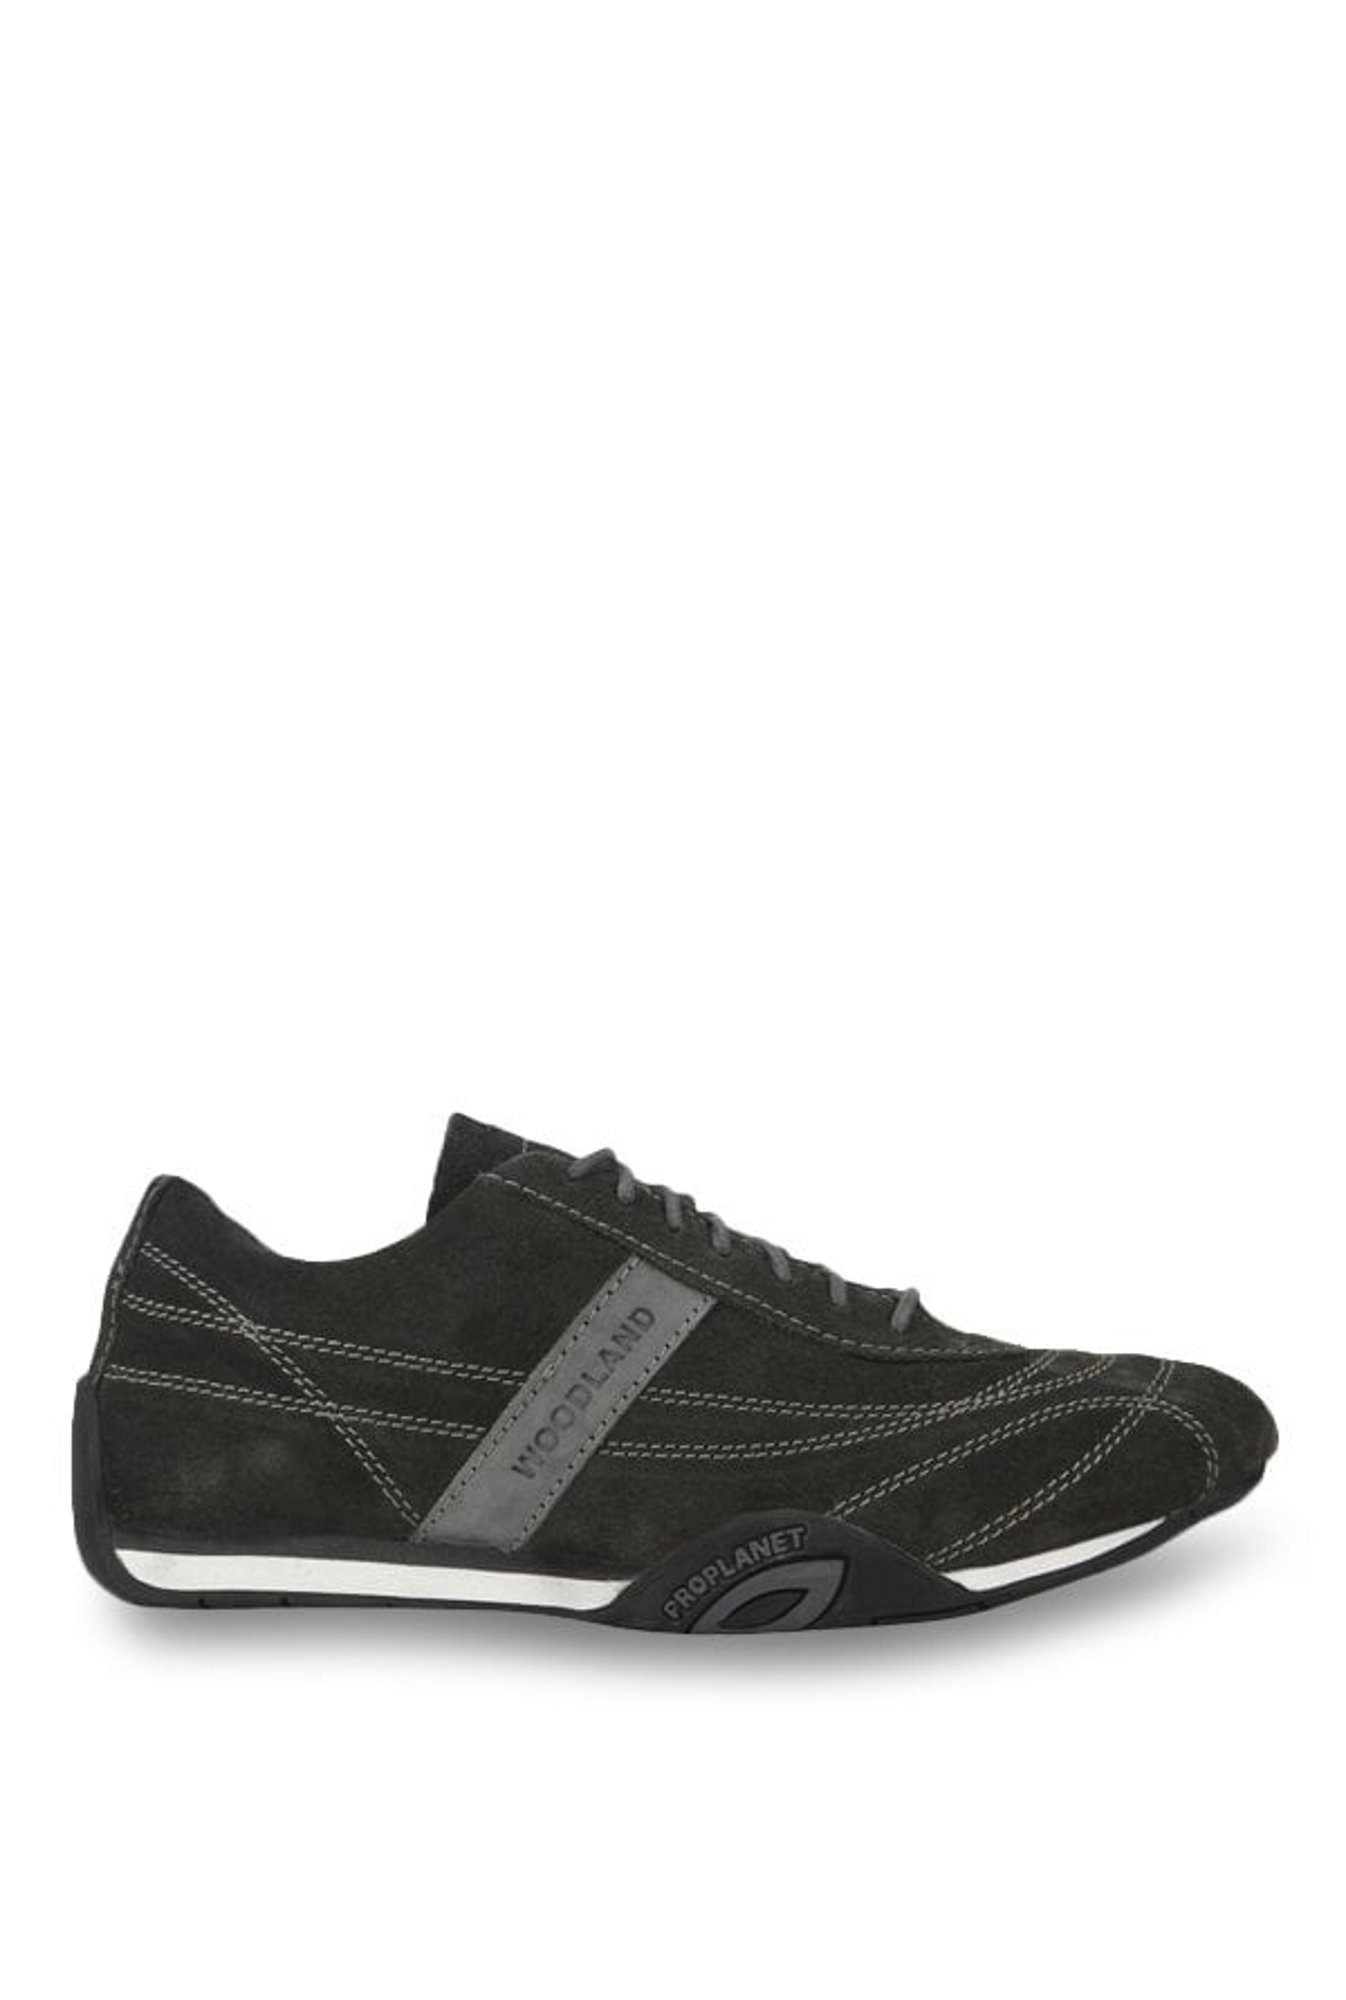 Woodland Dark Grey Casual Shoes from 